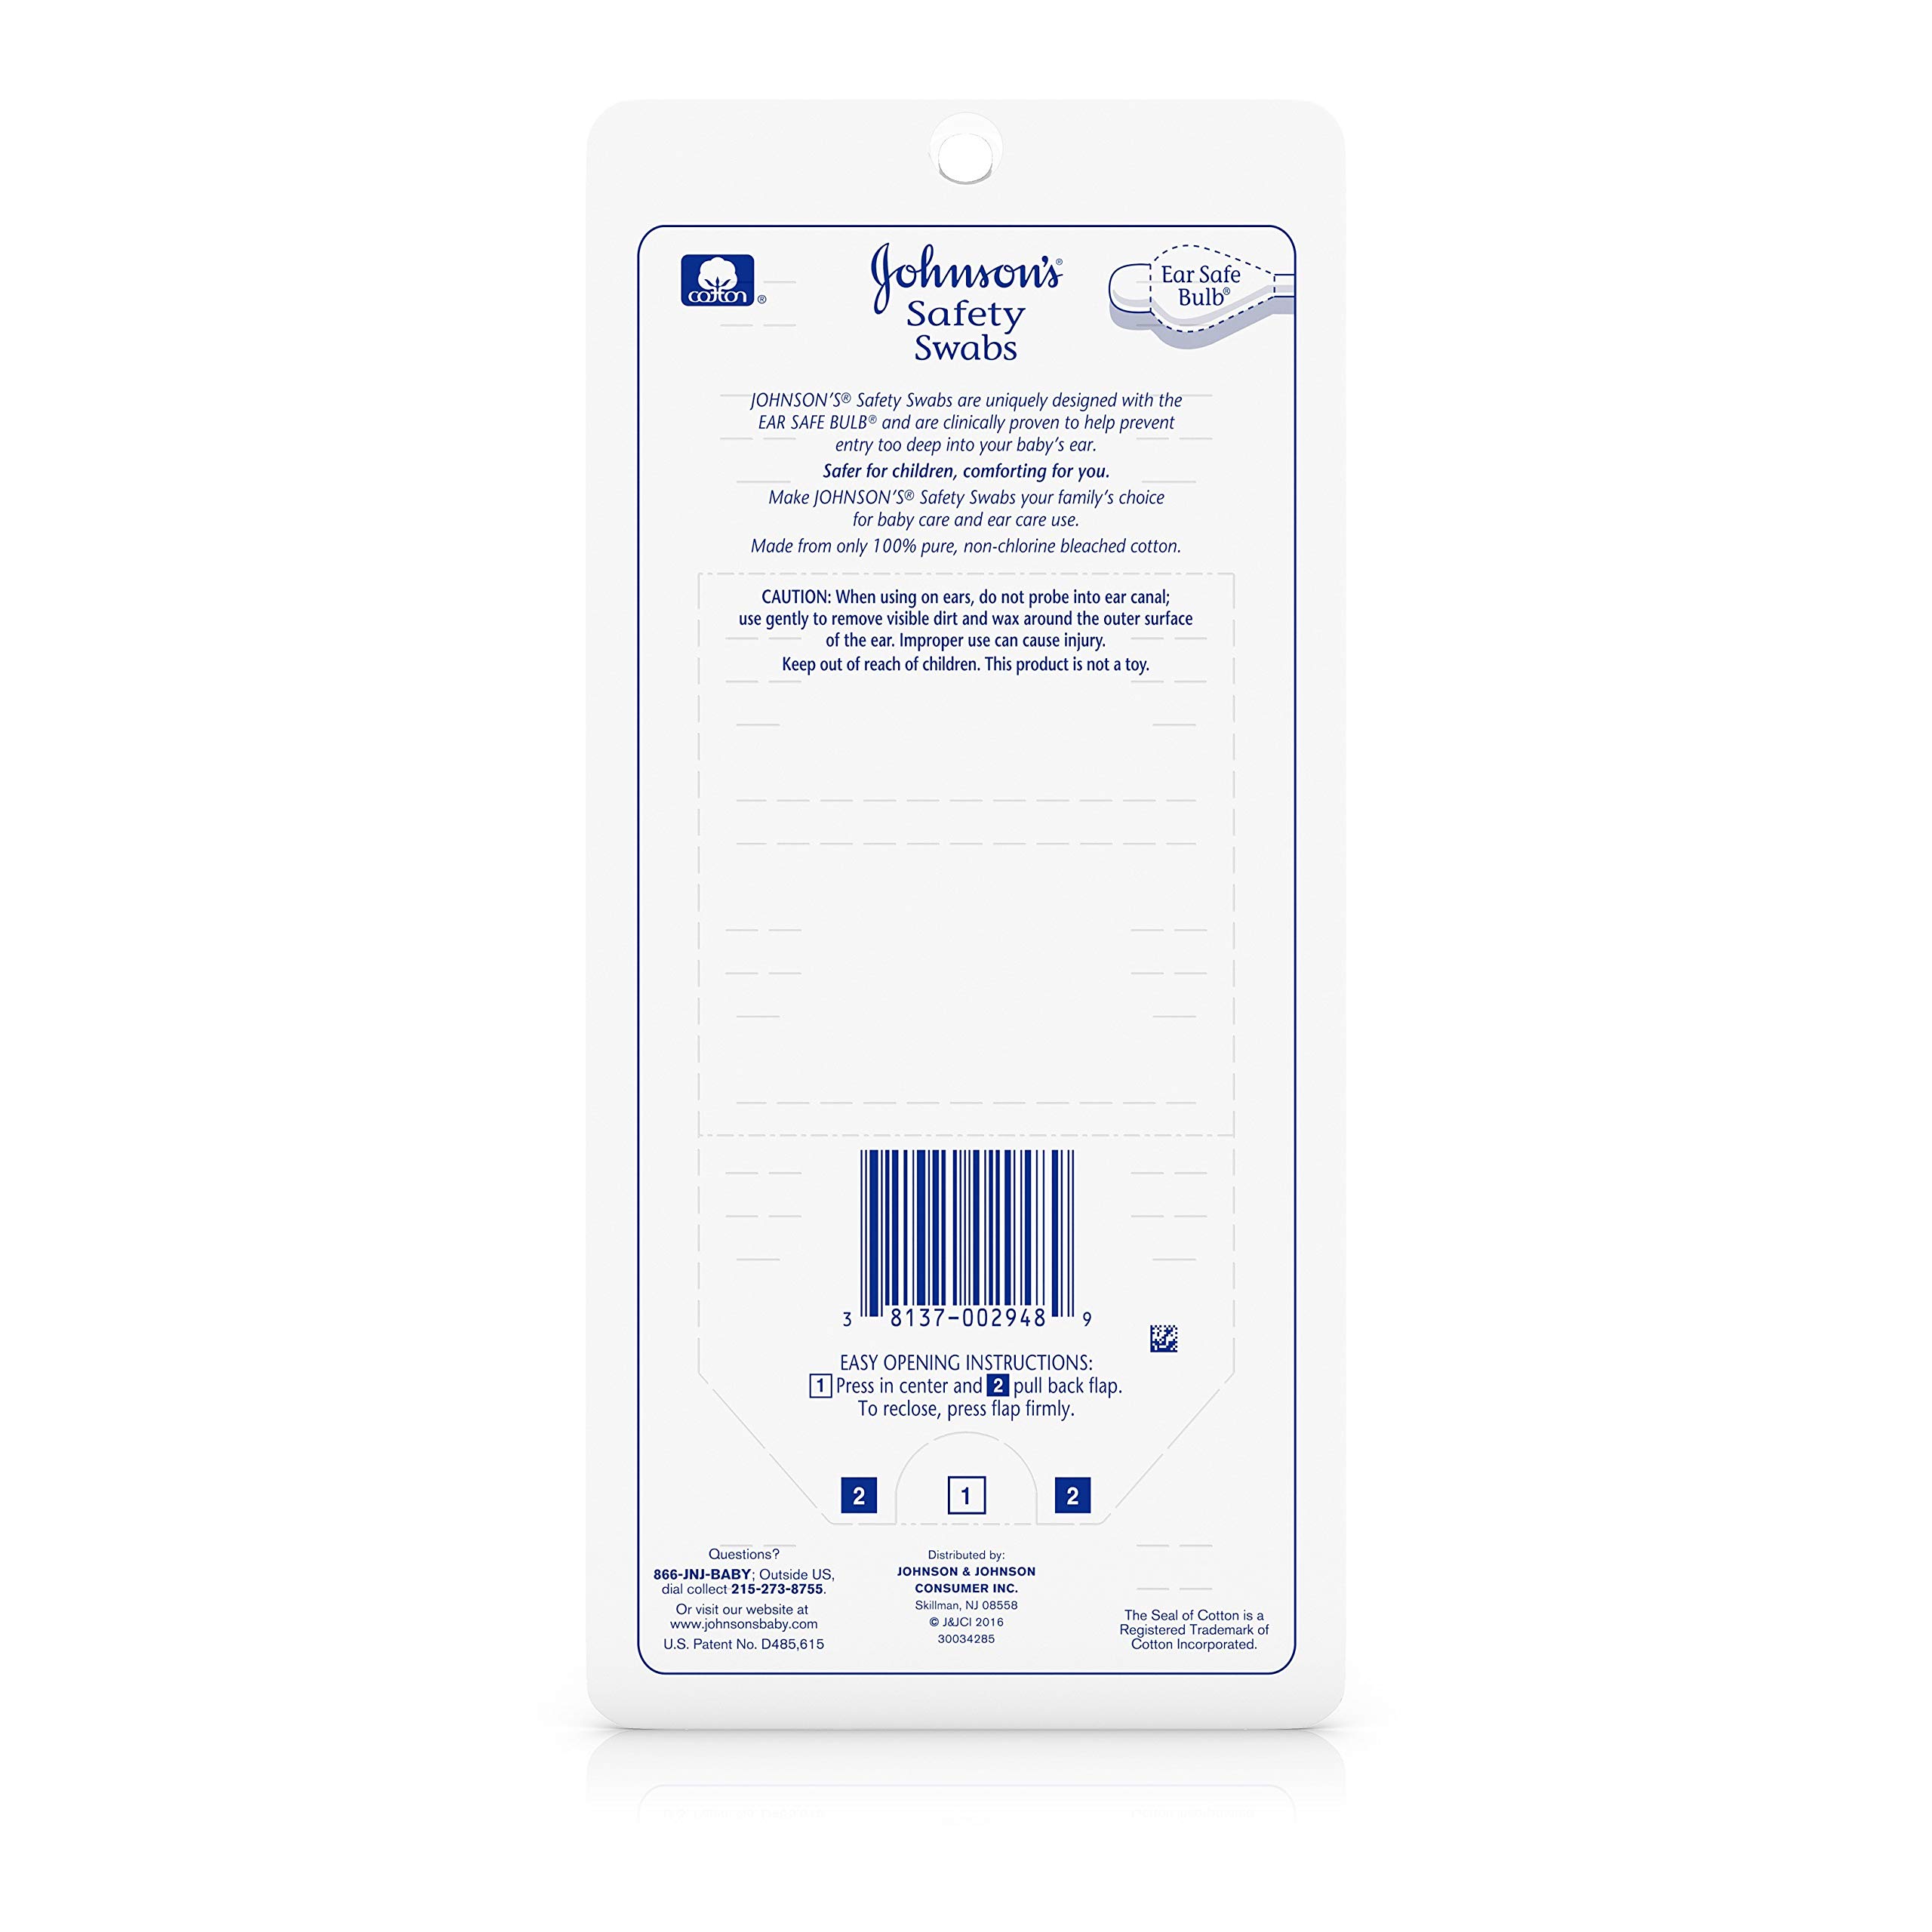 JOHNSON'S Safety Swabs 185 Each